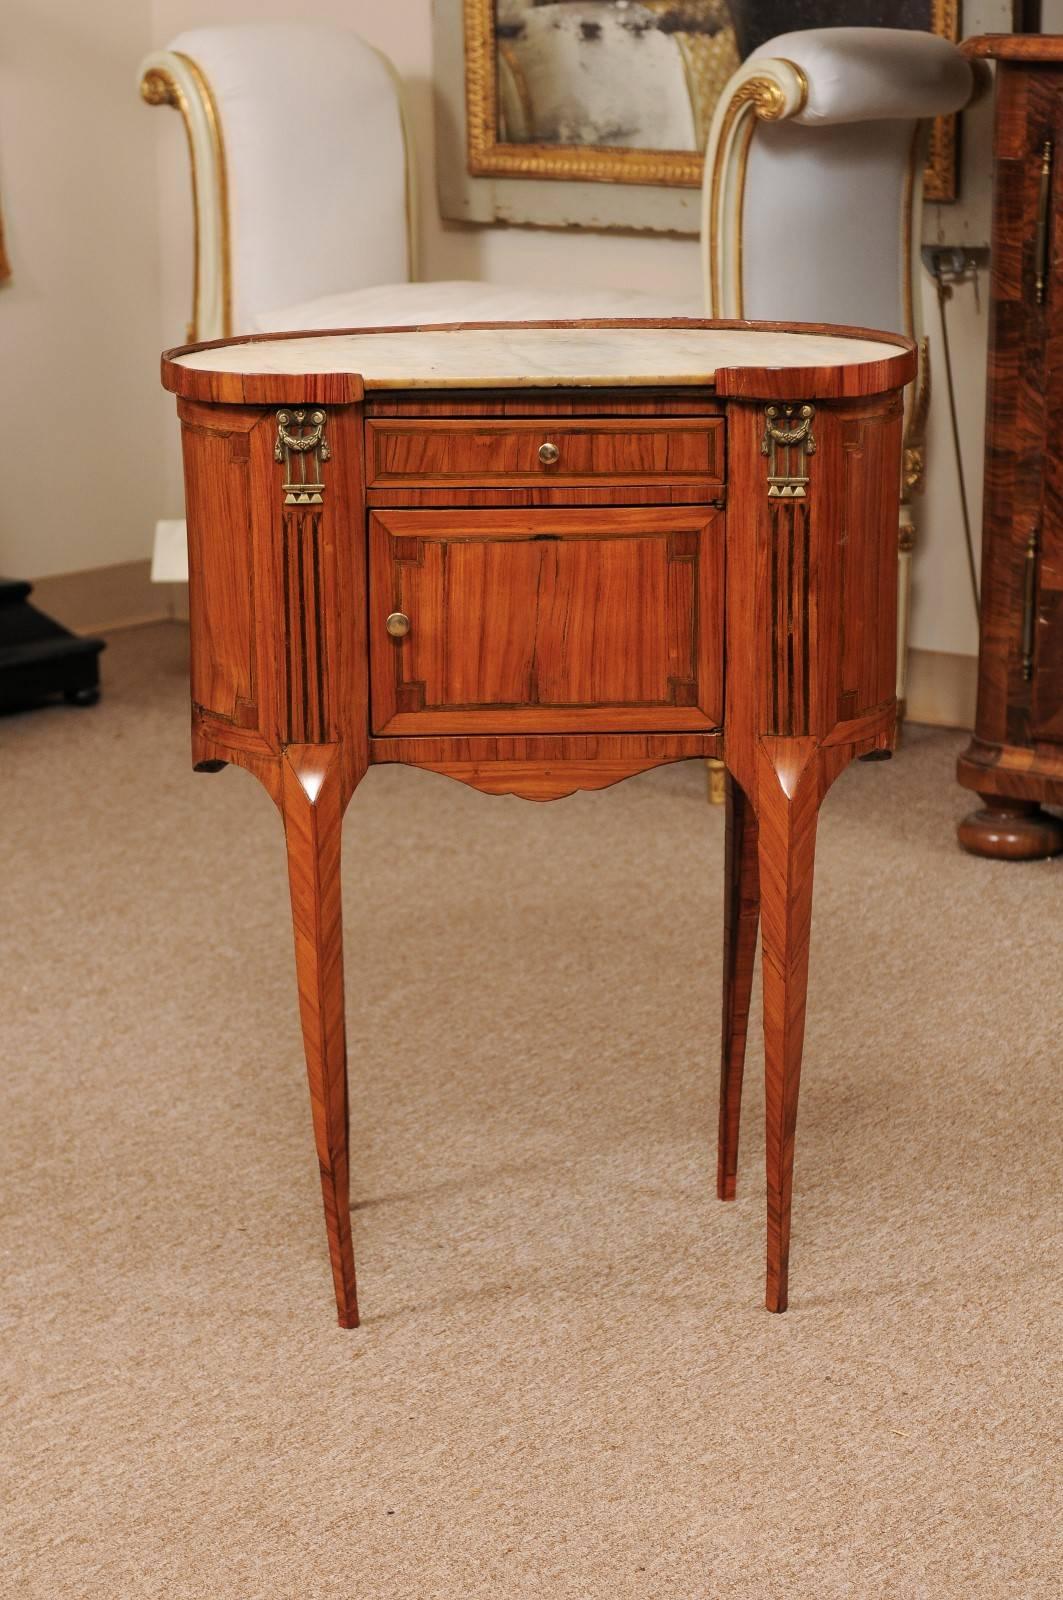 18th century French Louis XVI period kidney shaped tulipwood table with drawer, cabinet door, & marble top.